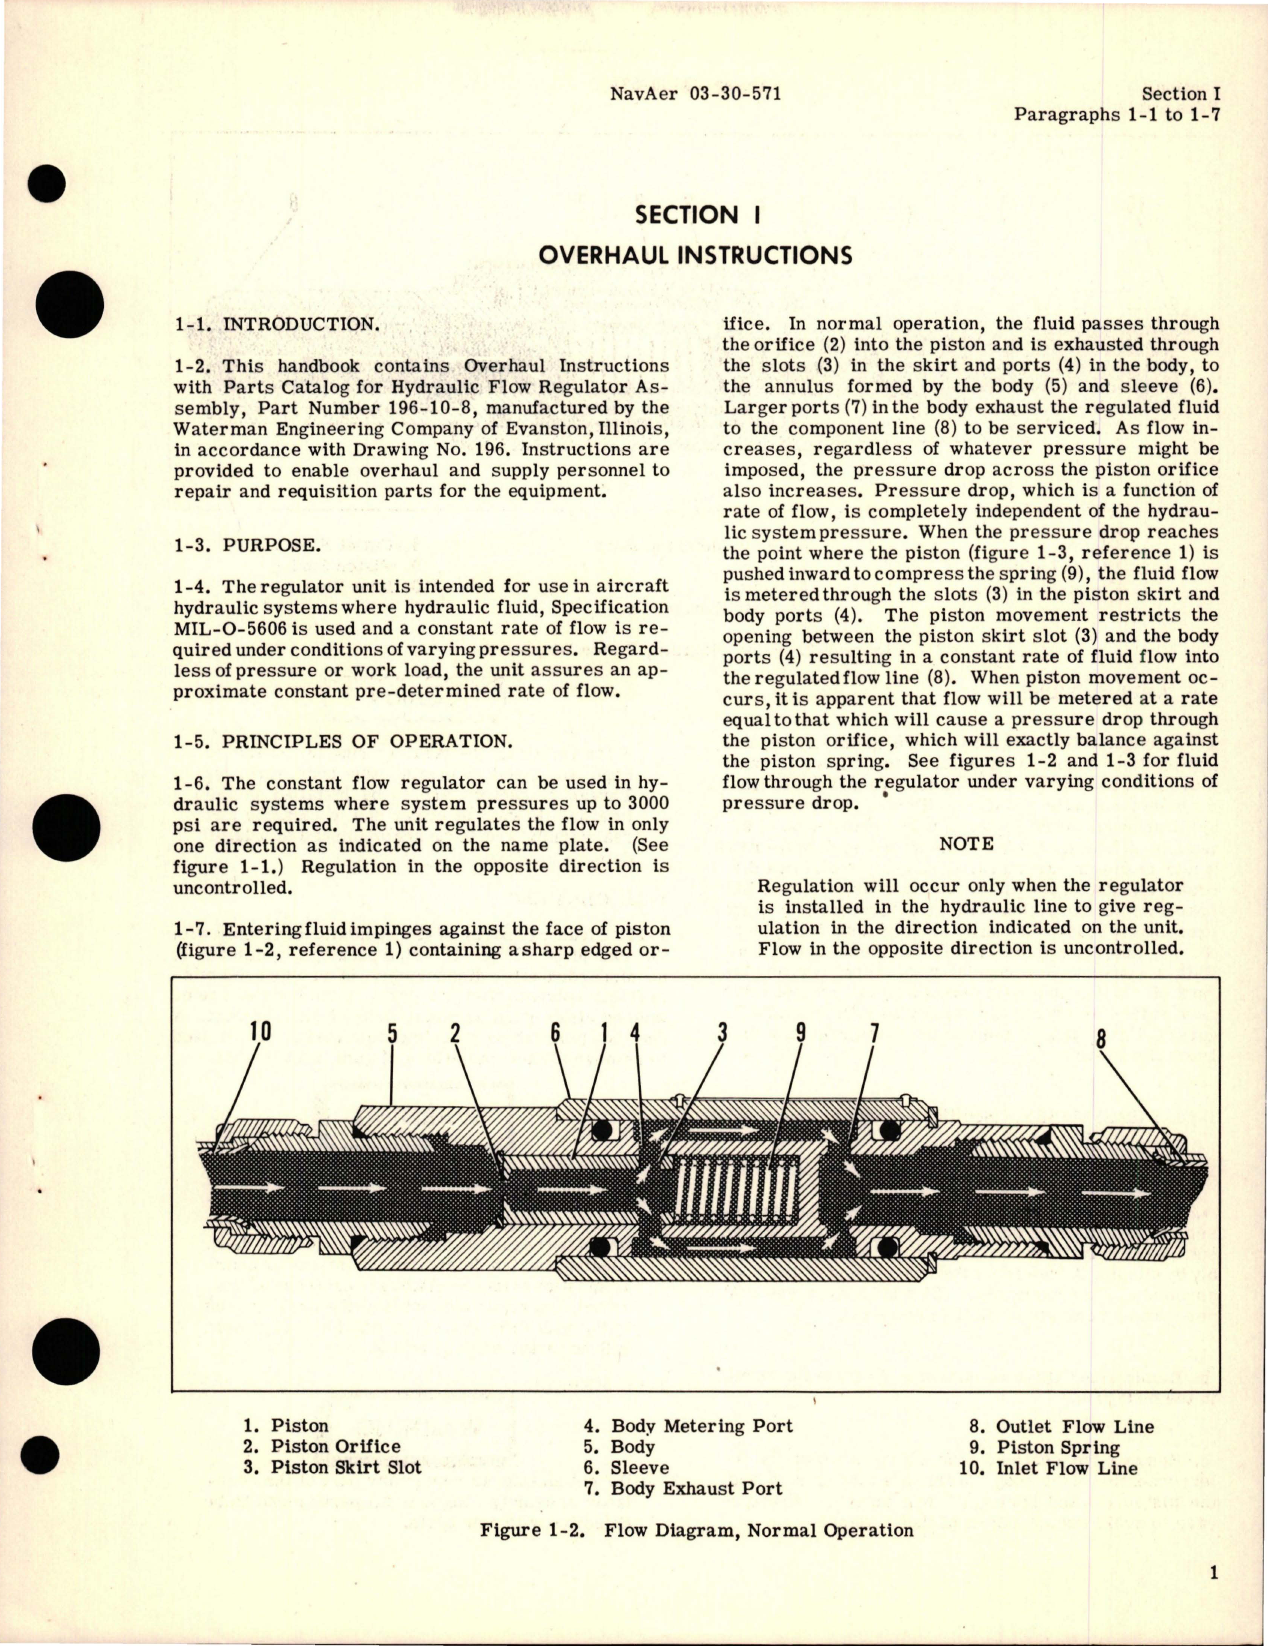 Sample page 5 from AirCorps Library document: Overhaul Instructions with Parts Catalog for Hydraulic Flow Regulator - Part 196-10-8